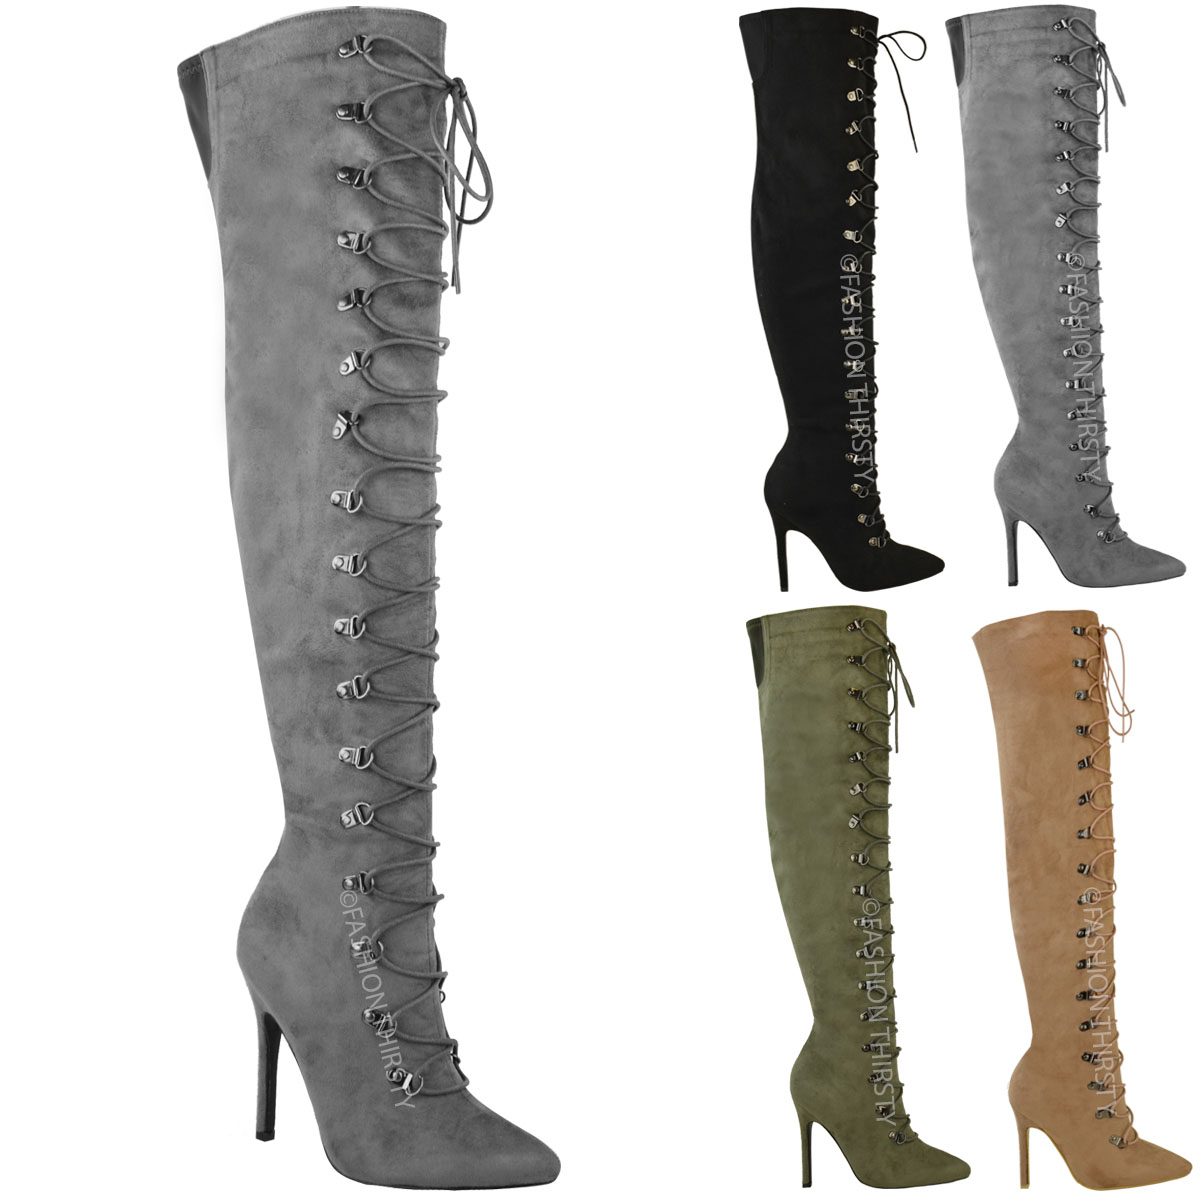 Womens Ladies Thigh High Over The Knee Stiletto Heel Boots Lace Up Shoes Size eBay